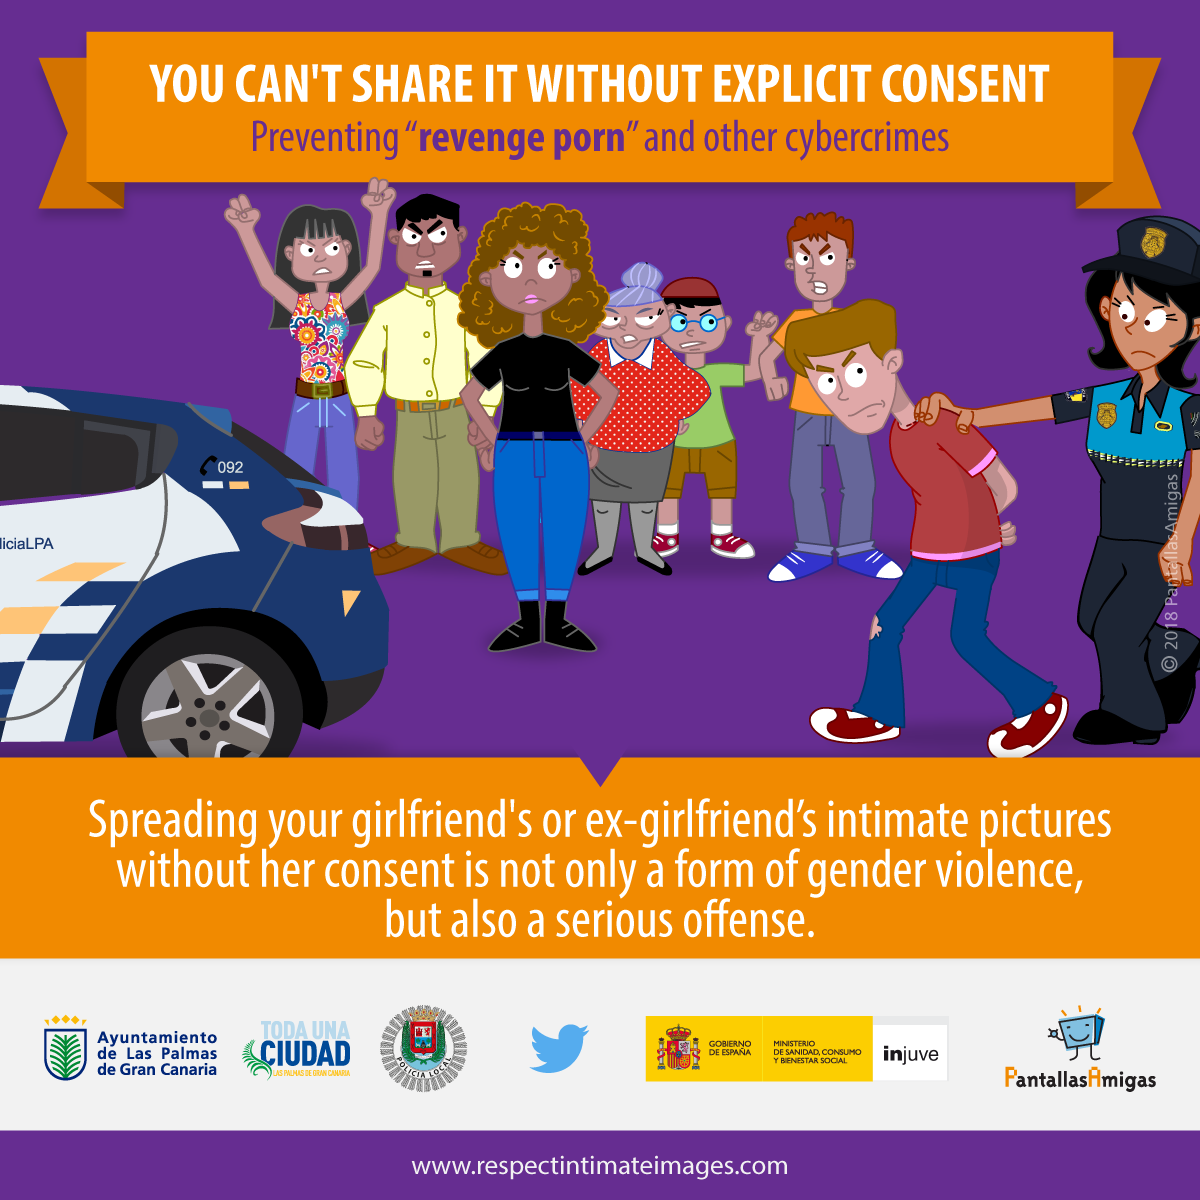 Spreading your girlfriend's or ex-girlfriend’s intimate pictures without her consent is not only a form of gender violence,but also a serious offense.